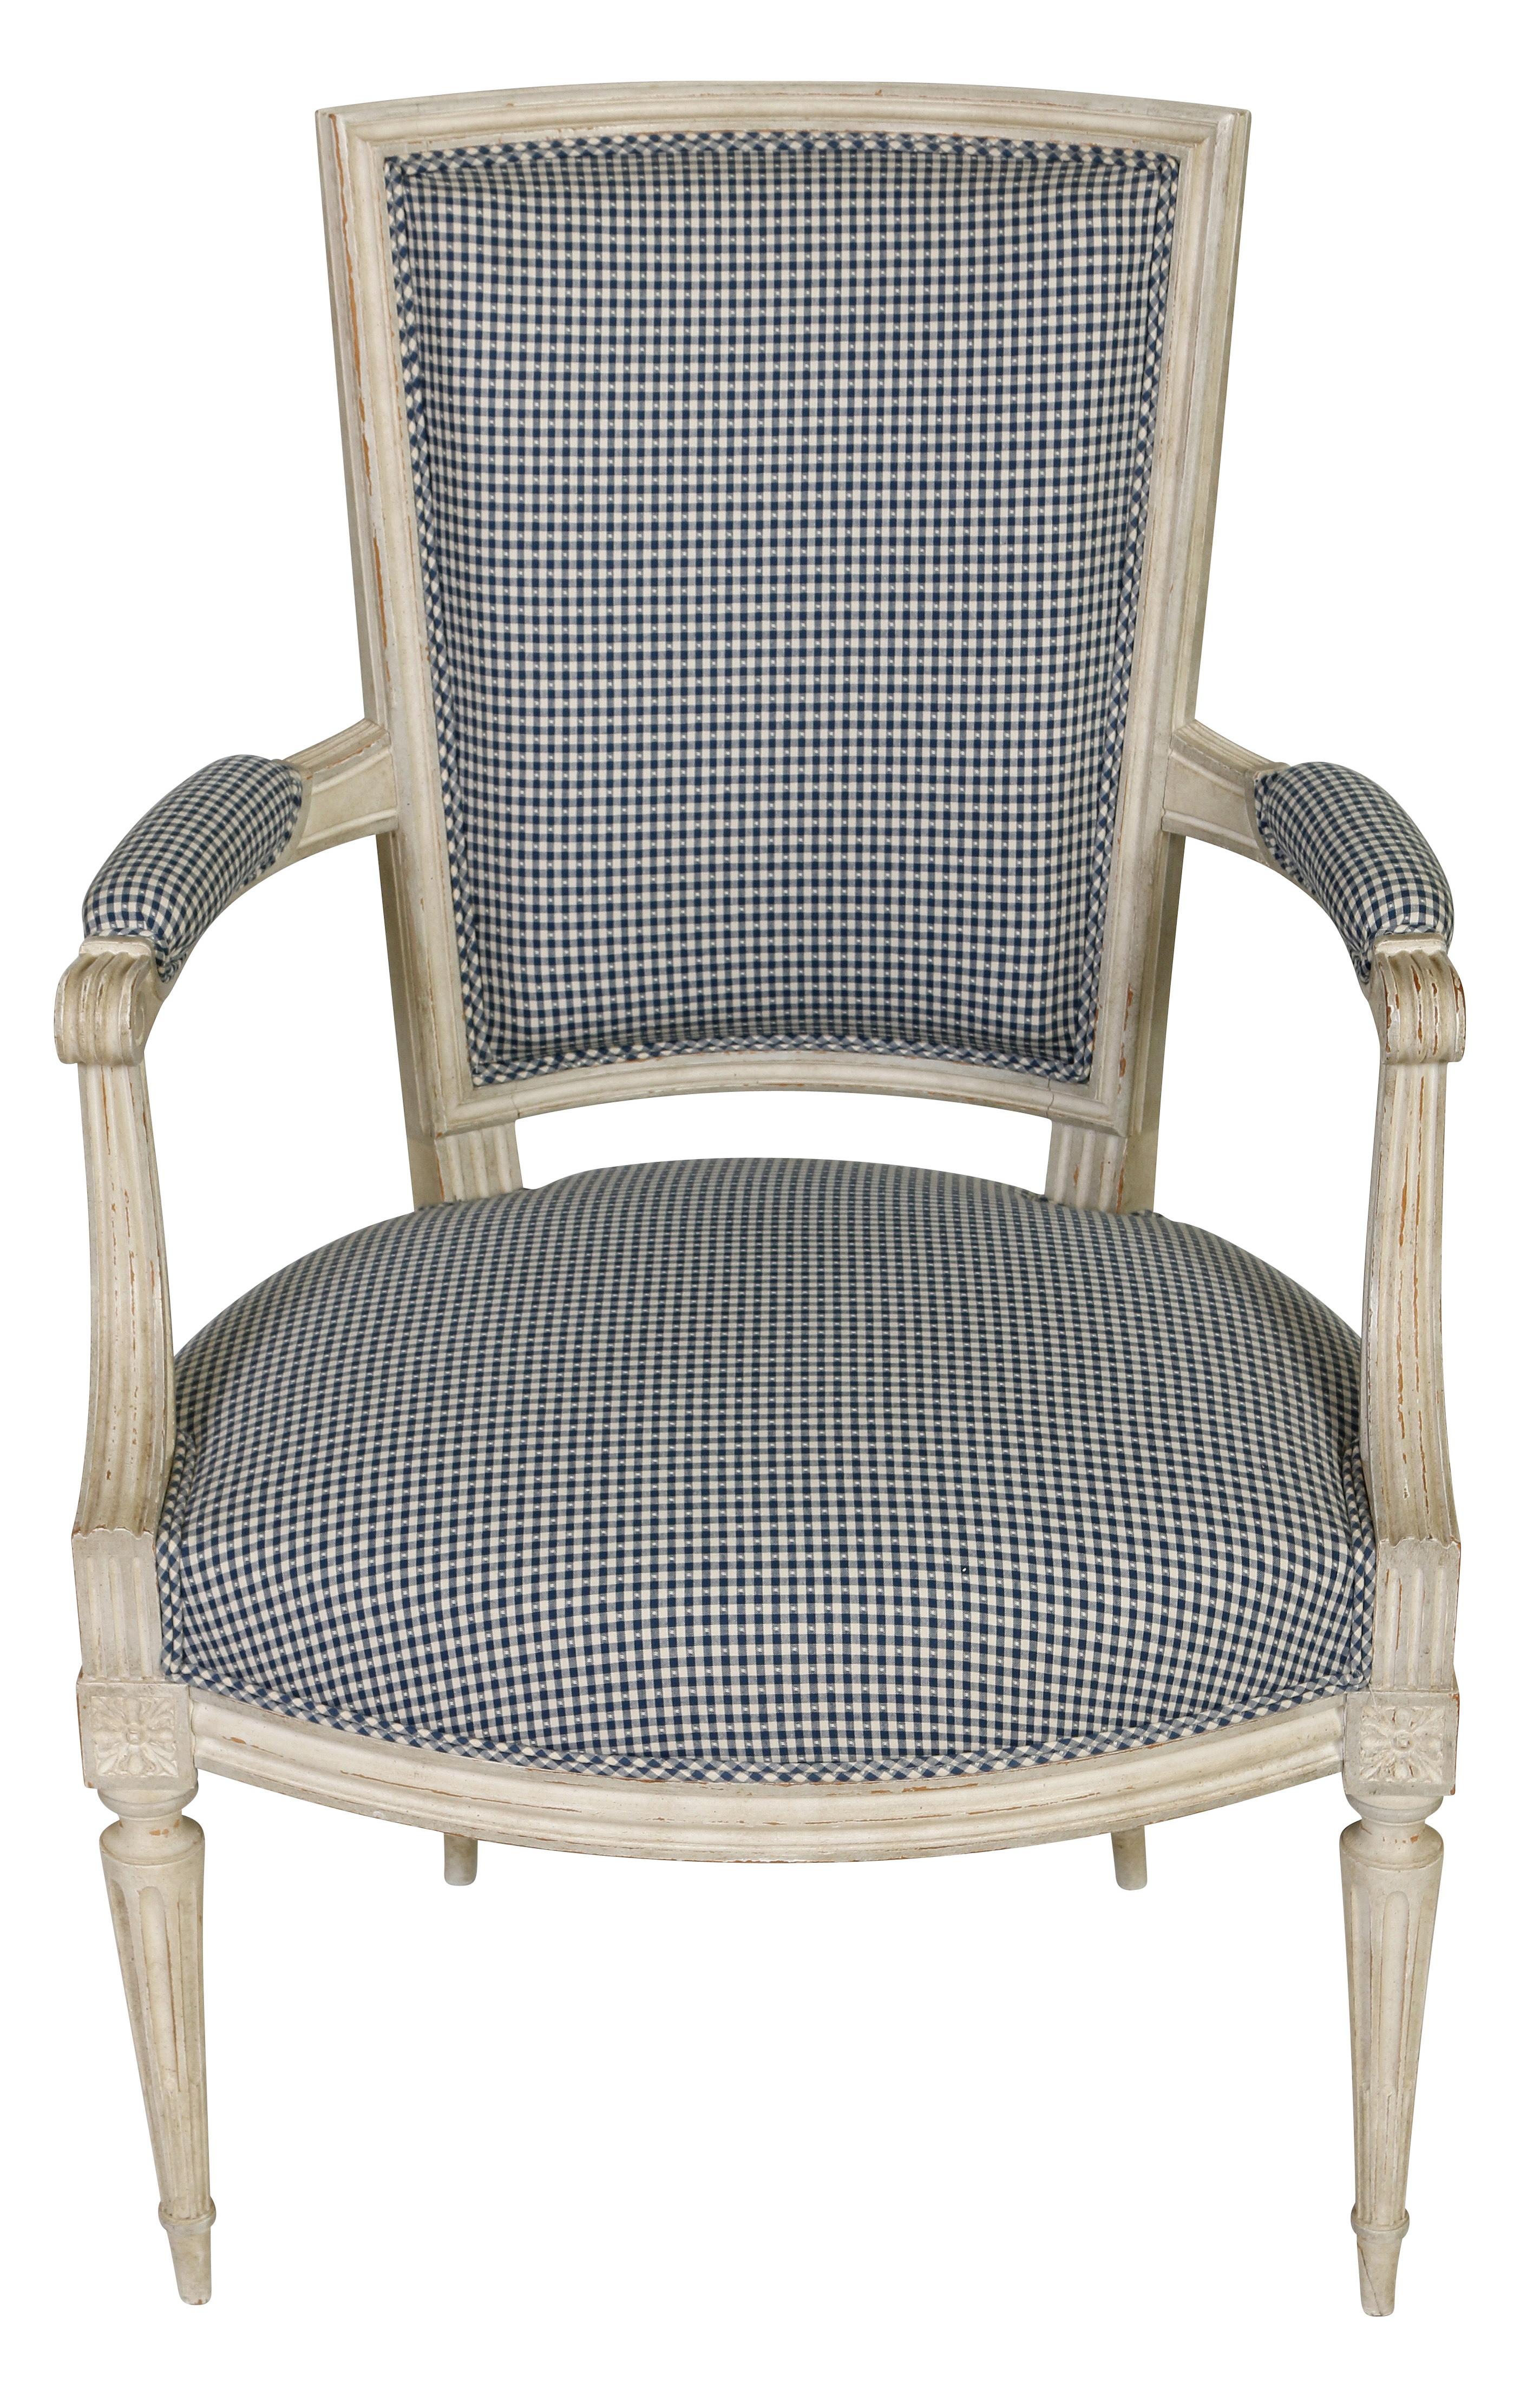 Blue and white gingham will never go out of style. This pair of arm. chairs have a grayish white painted finish. and feature many. of the lovely details characteristic of the Louis XVI style--a. squared. back, fluted, tapered legs, and beautifully